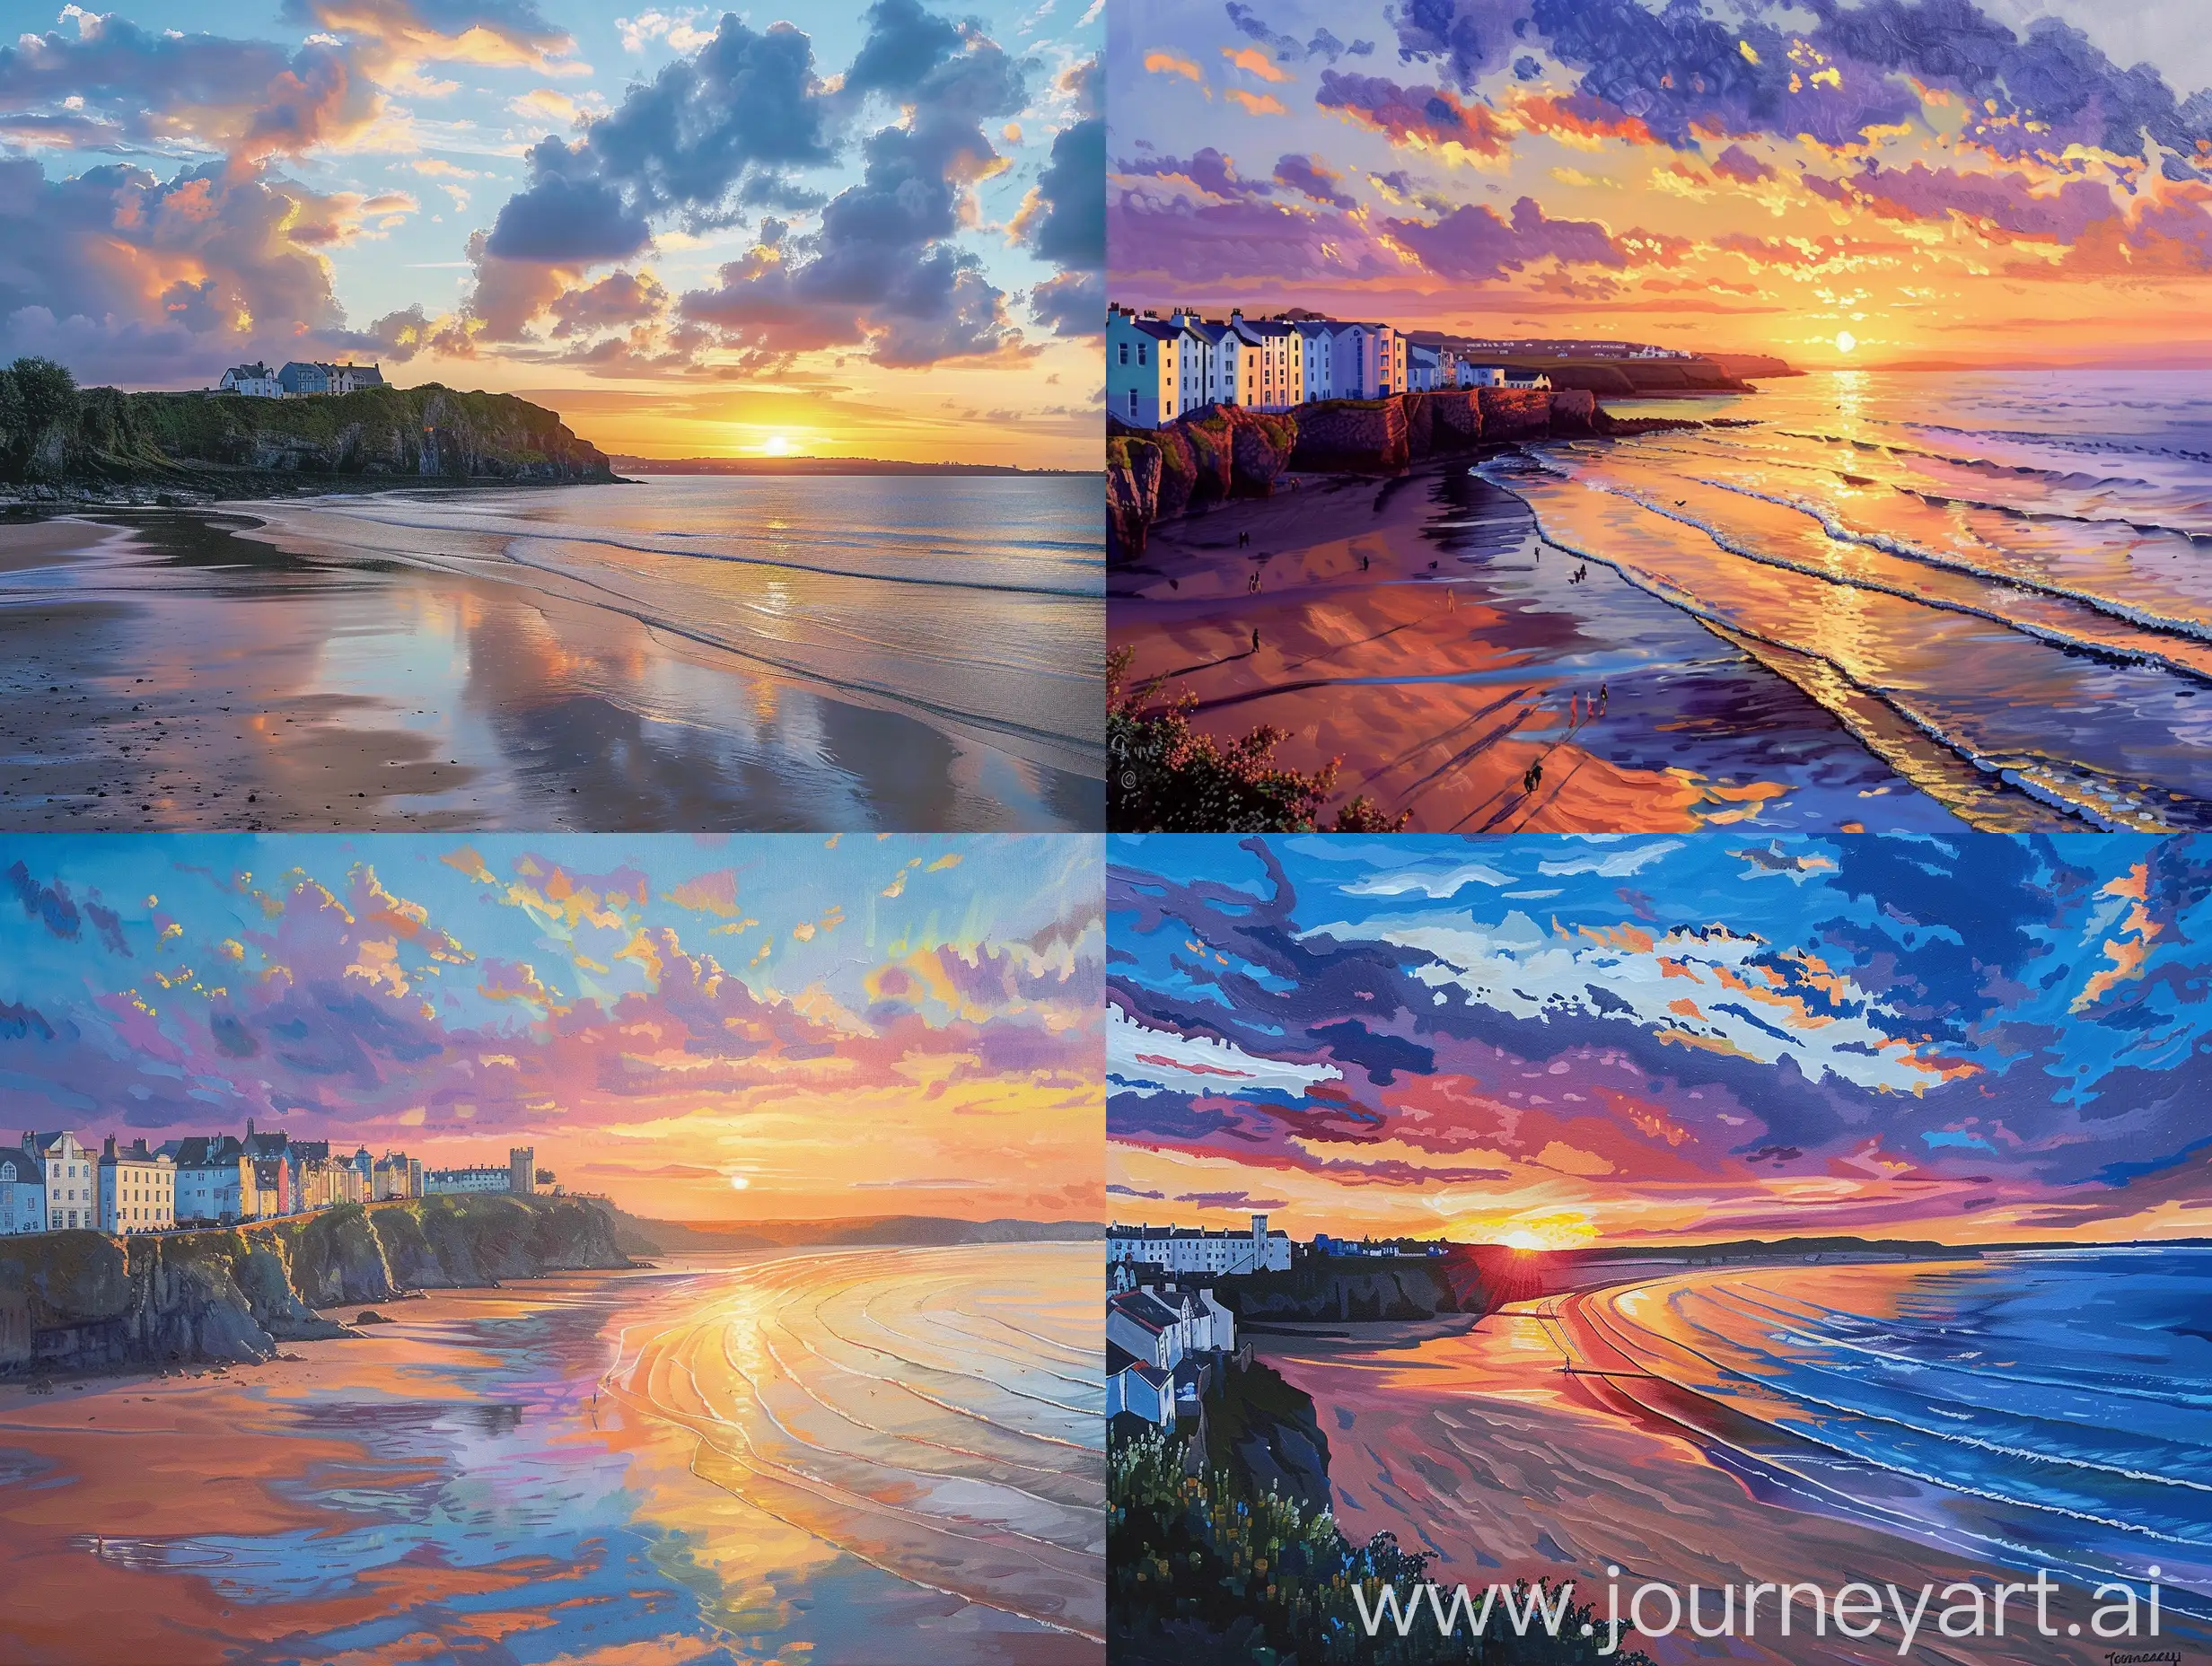 Picturesque-Sunset-at-North-Beach-Tenby-Inspired-by-Pierre-FixMasseaus-Artistry